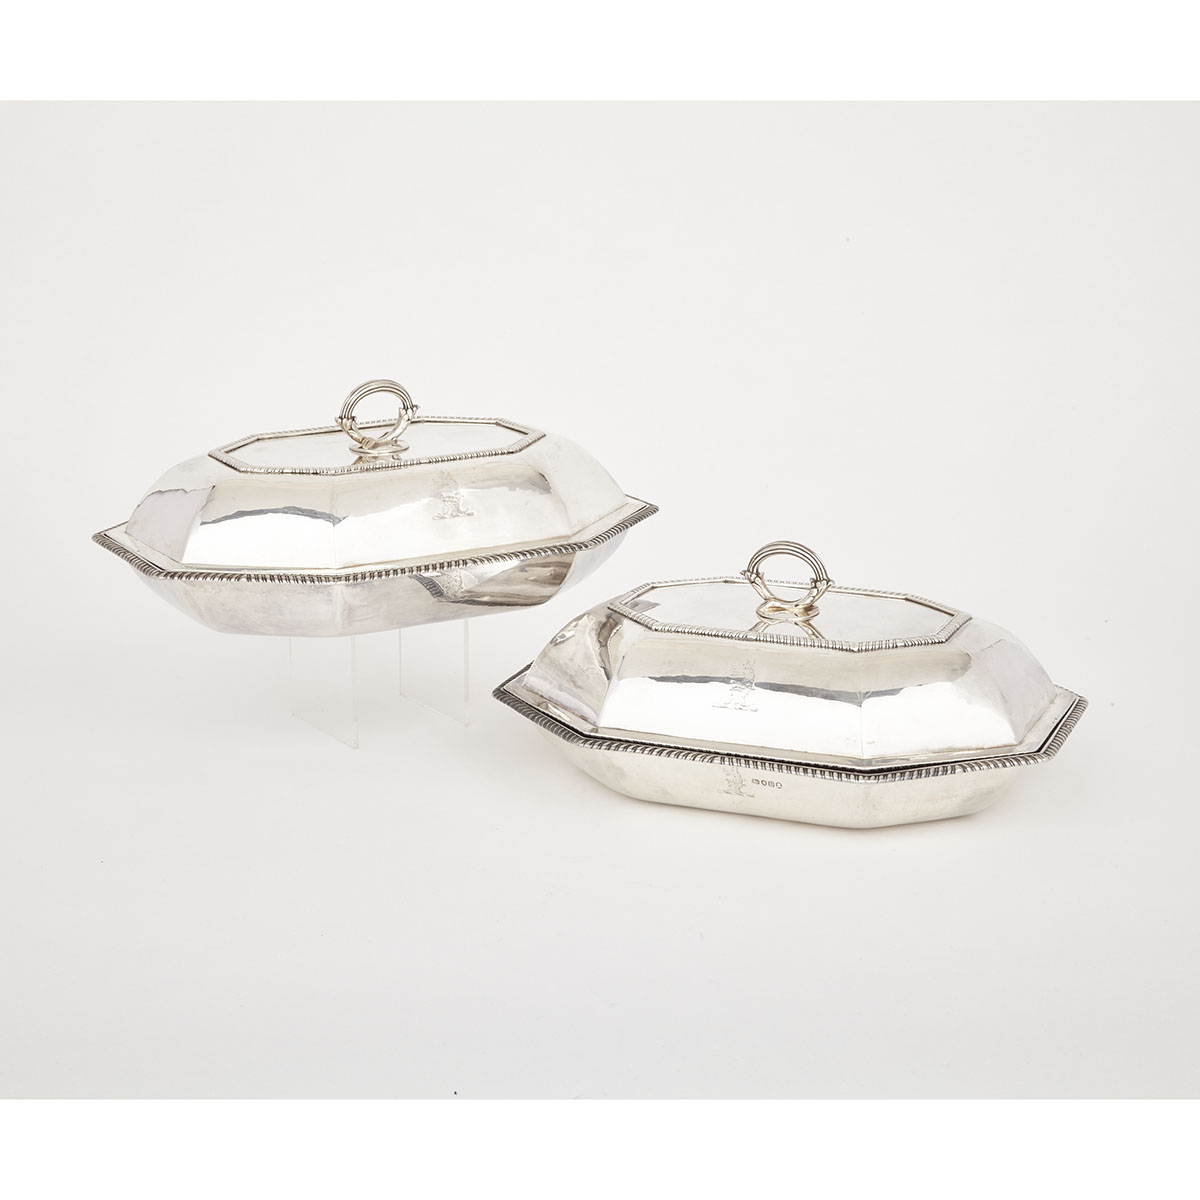 Pair of George III Silver Covered Entrée Dishes, Henry Nutting, London, 1800